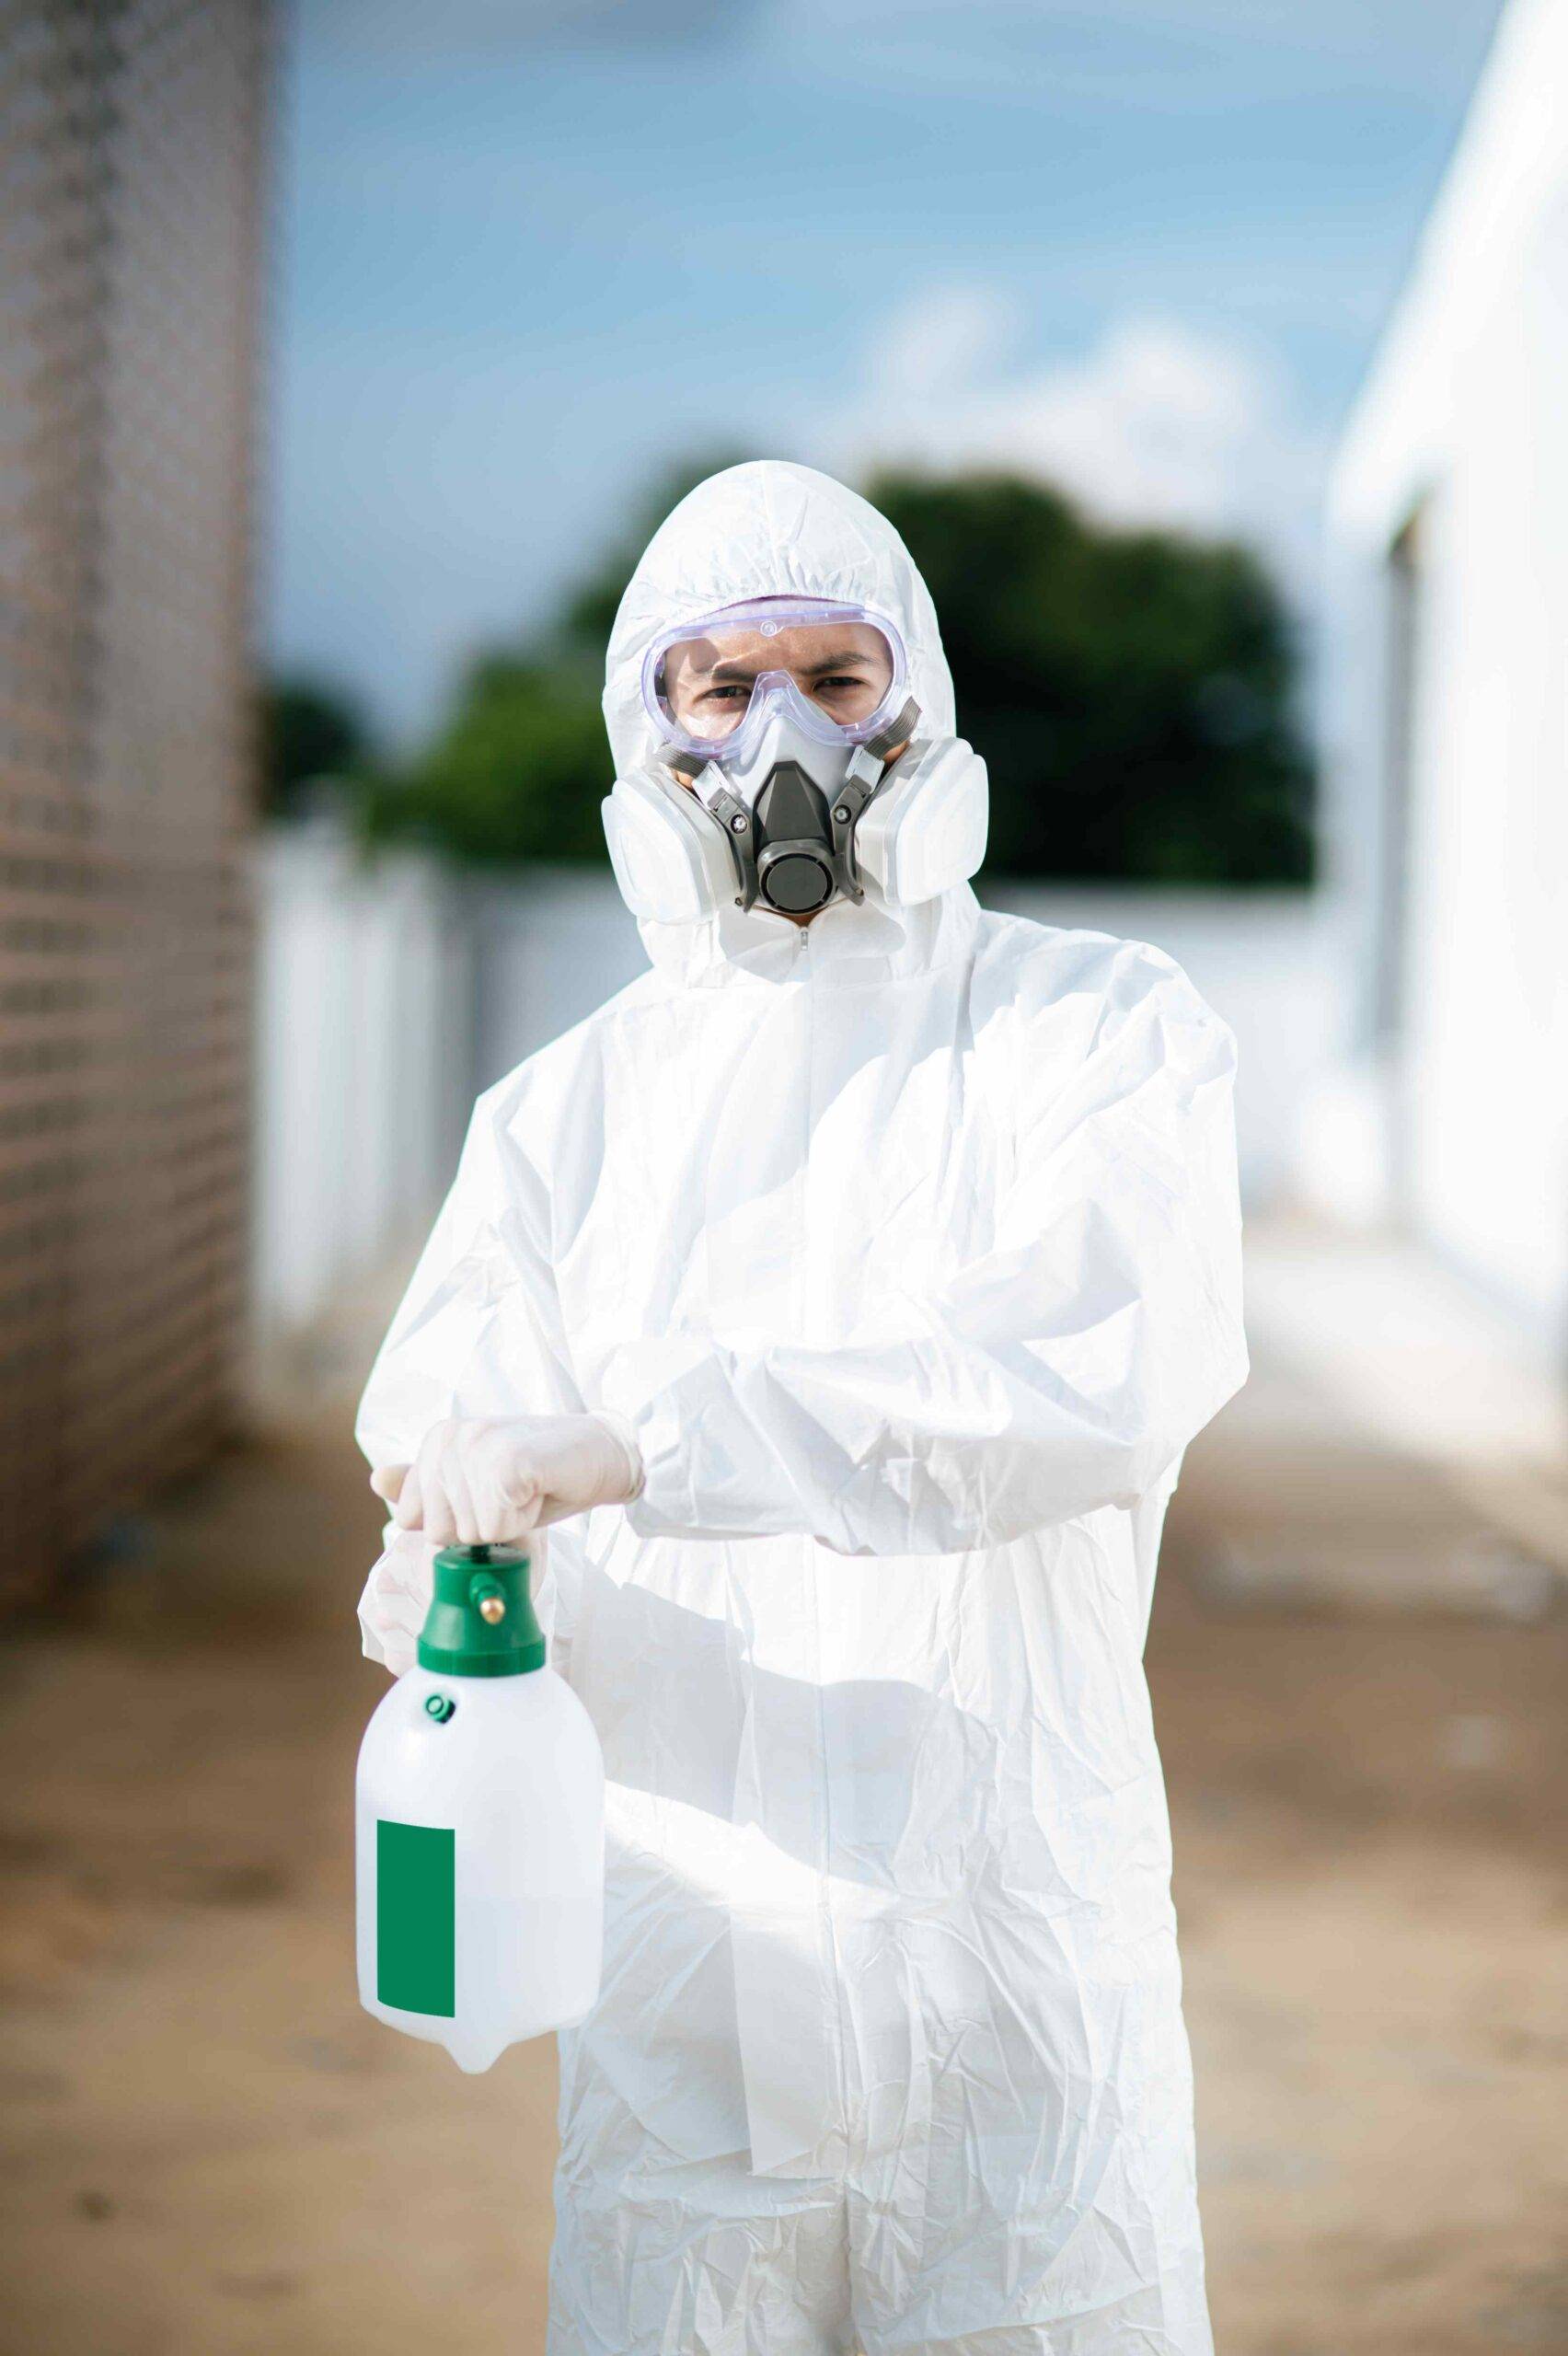 disinfection specialist in ppe suit performing pub 2021 09 04 01 58 44 utc 1 scaled - Decon Solutions Australia Services